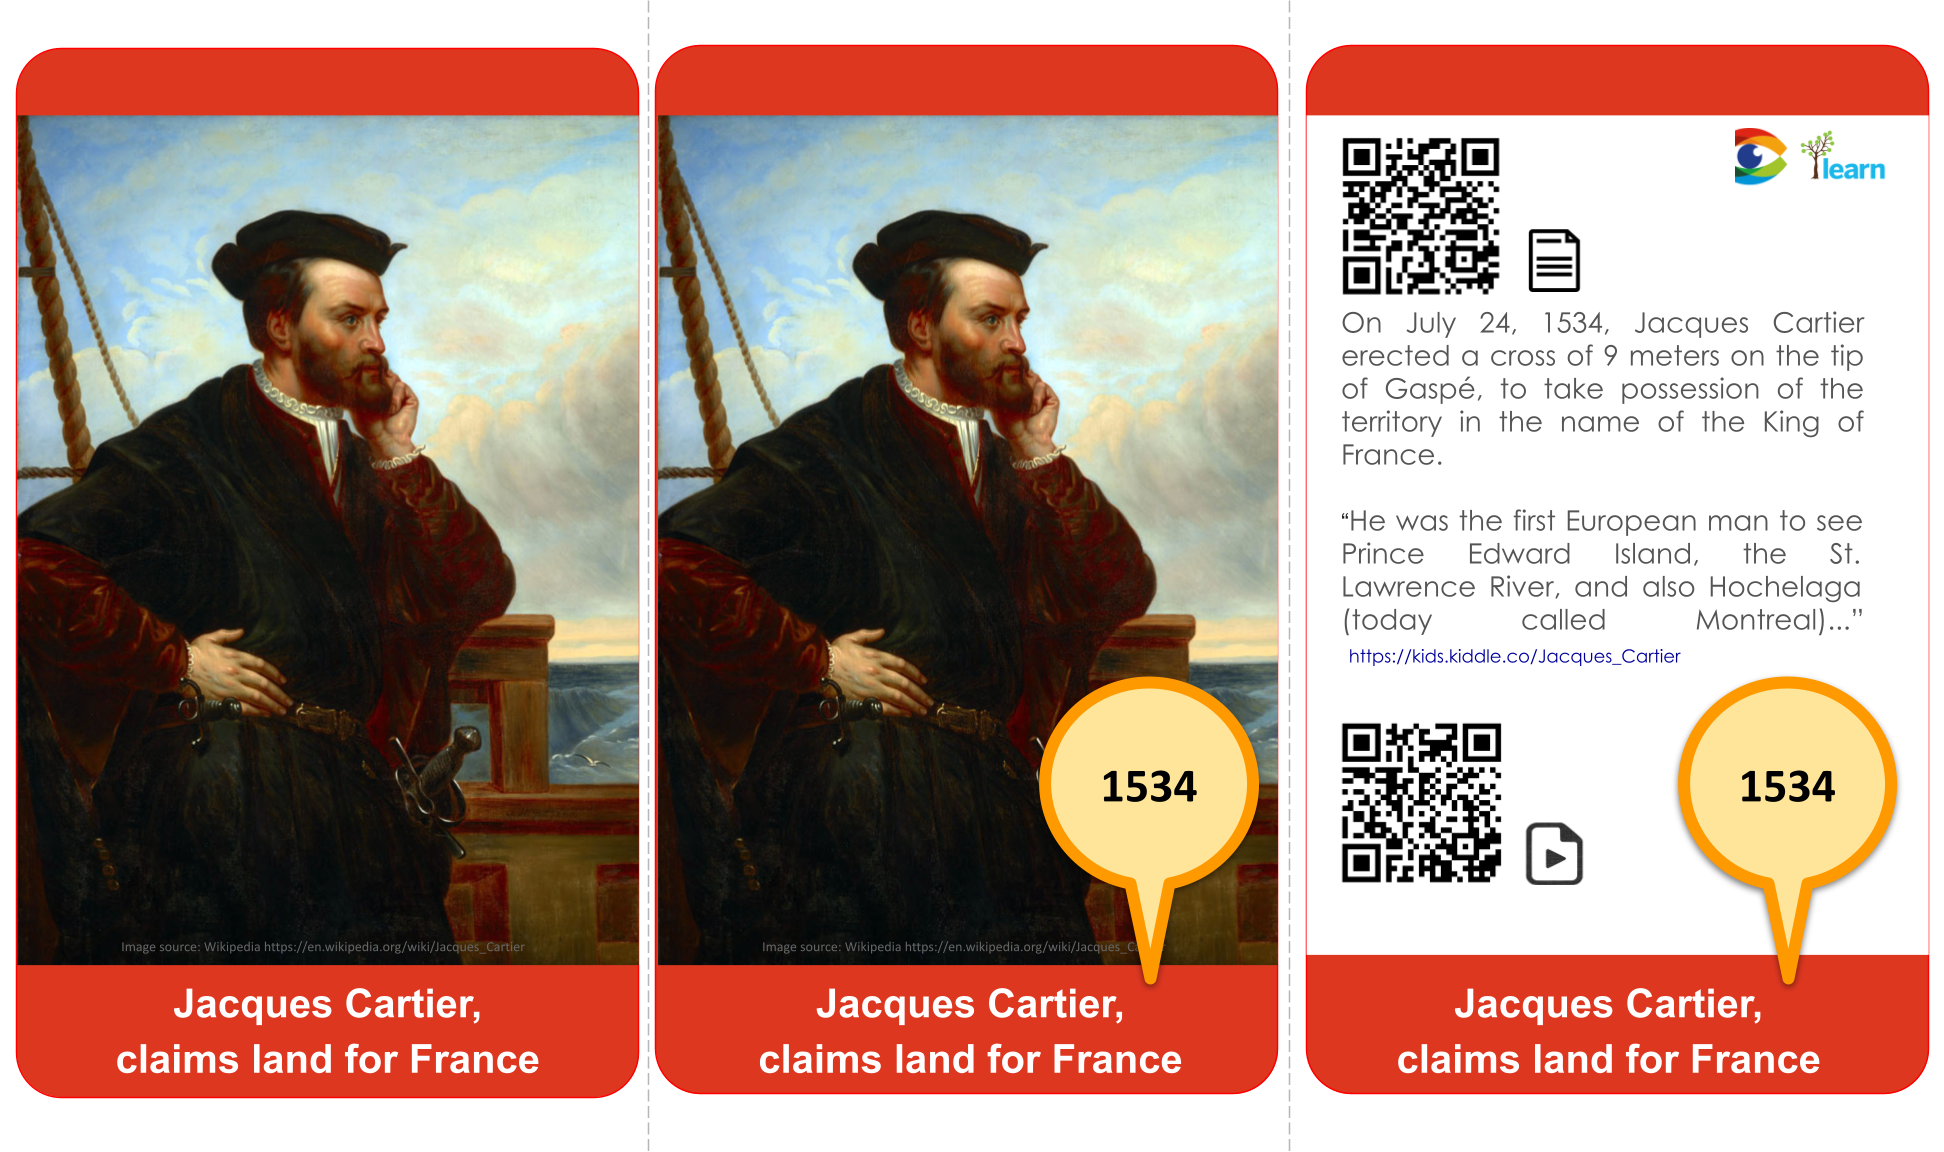 1534 Cartier claims land for France